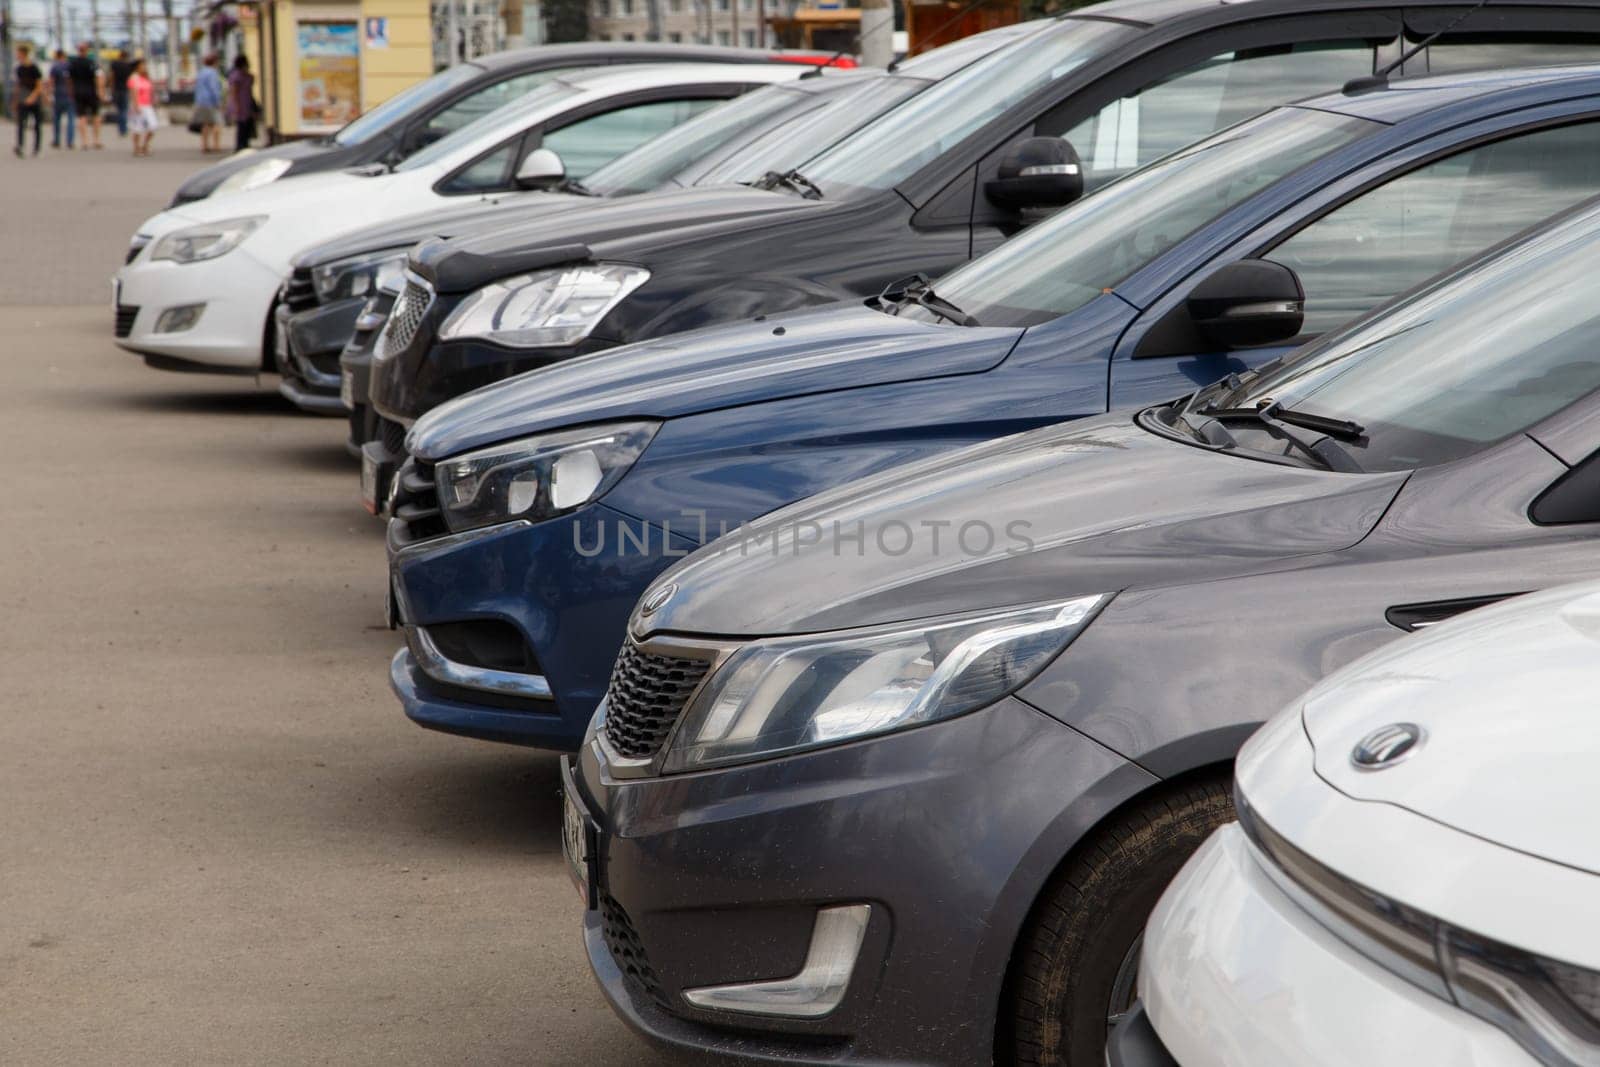 Tula, Russia - August 13, 2021: Row of cars on summer day parking - close-up view on front parts from side